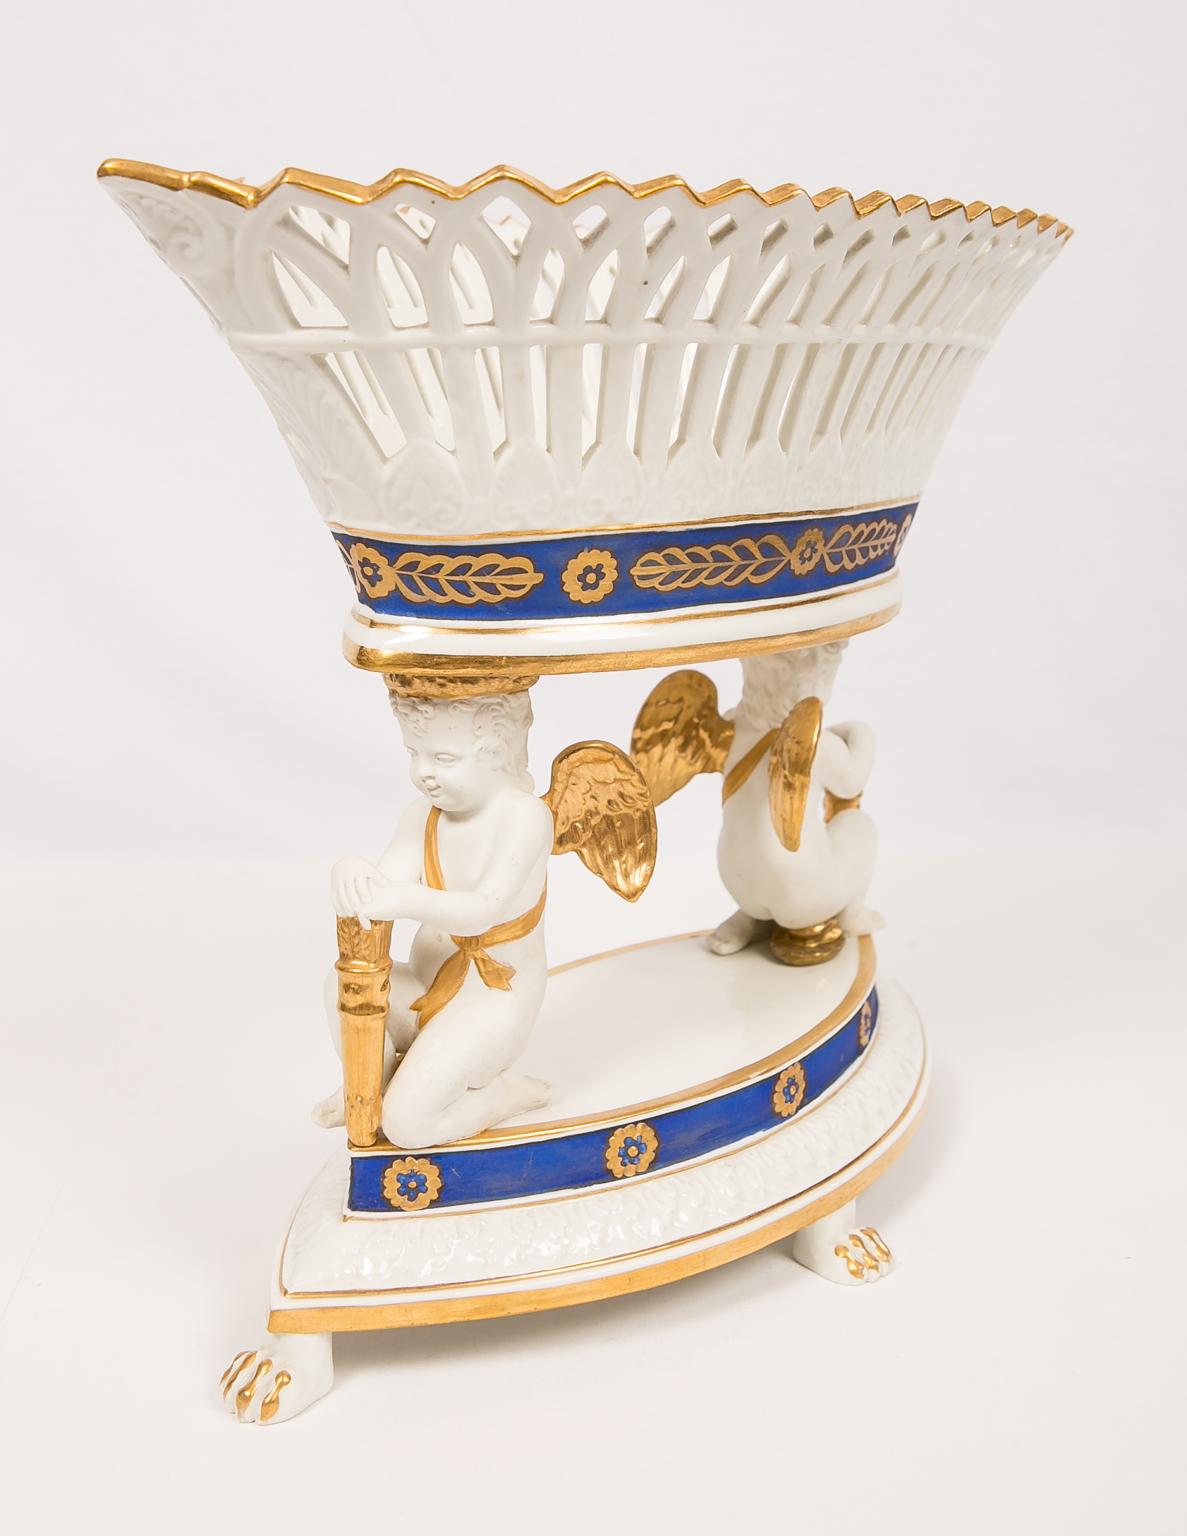 We are pleased to offer this large French porcelain centerpiece with angels supporting a pierced basket. The pierced basket is oval shaped. The porcelain angels are made in the bisque, seated on a oval base. The fine white of the porcelain is